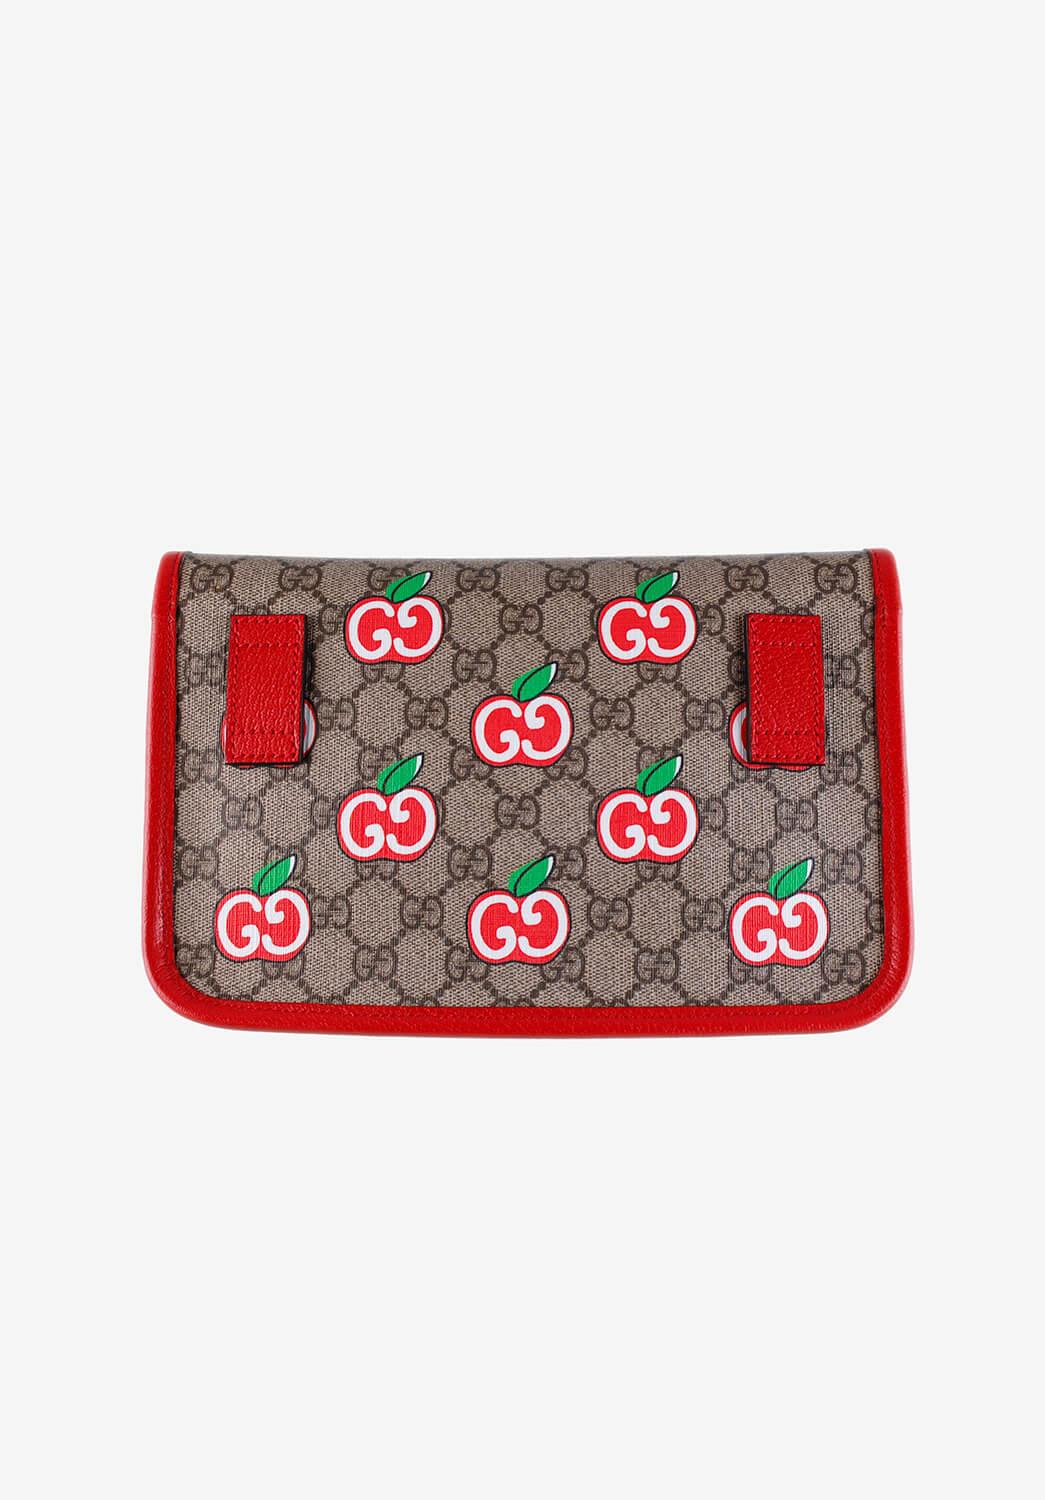 Pink  New Gucci GG Supreme Apple Print Women Waist Bag Leather Details S044 For Sale